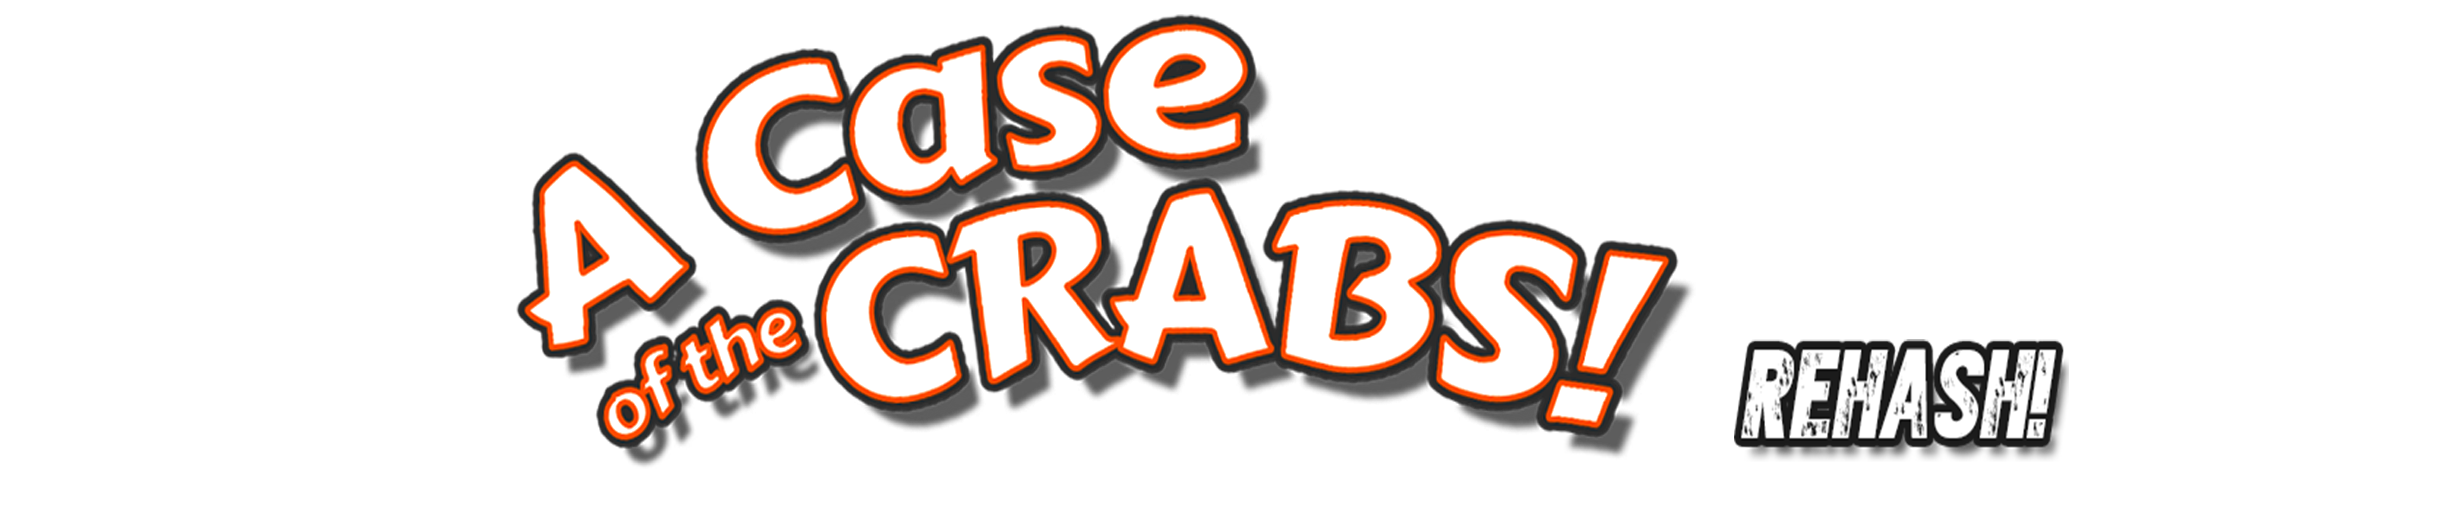 A Case of the Crabs: Rehash!